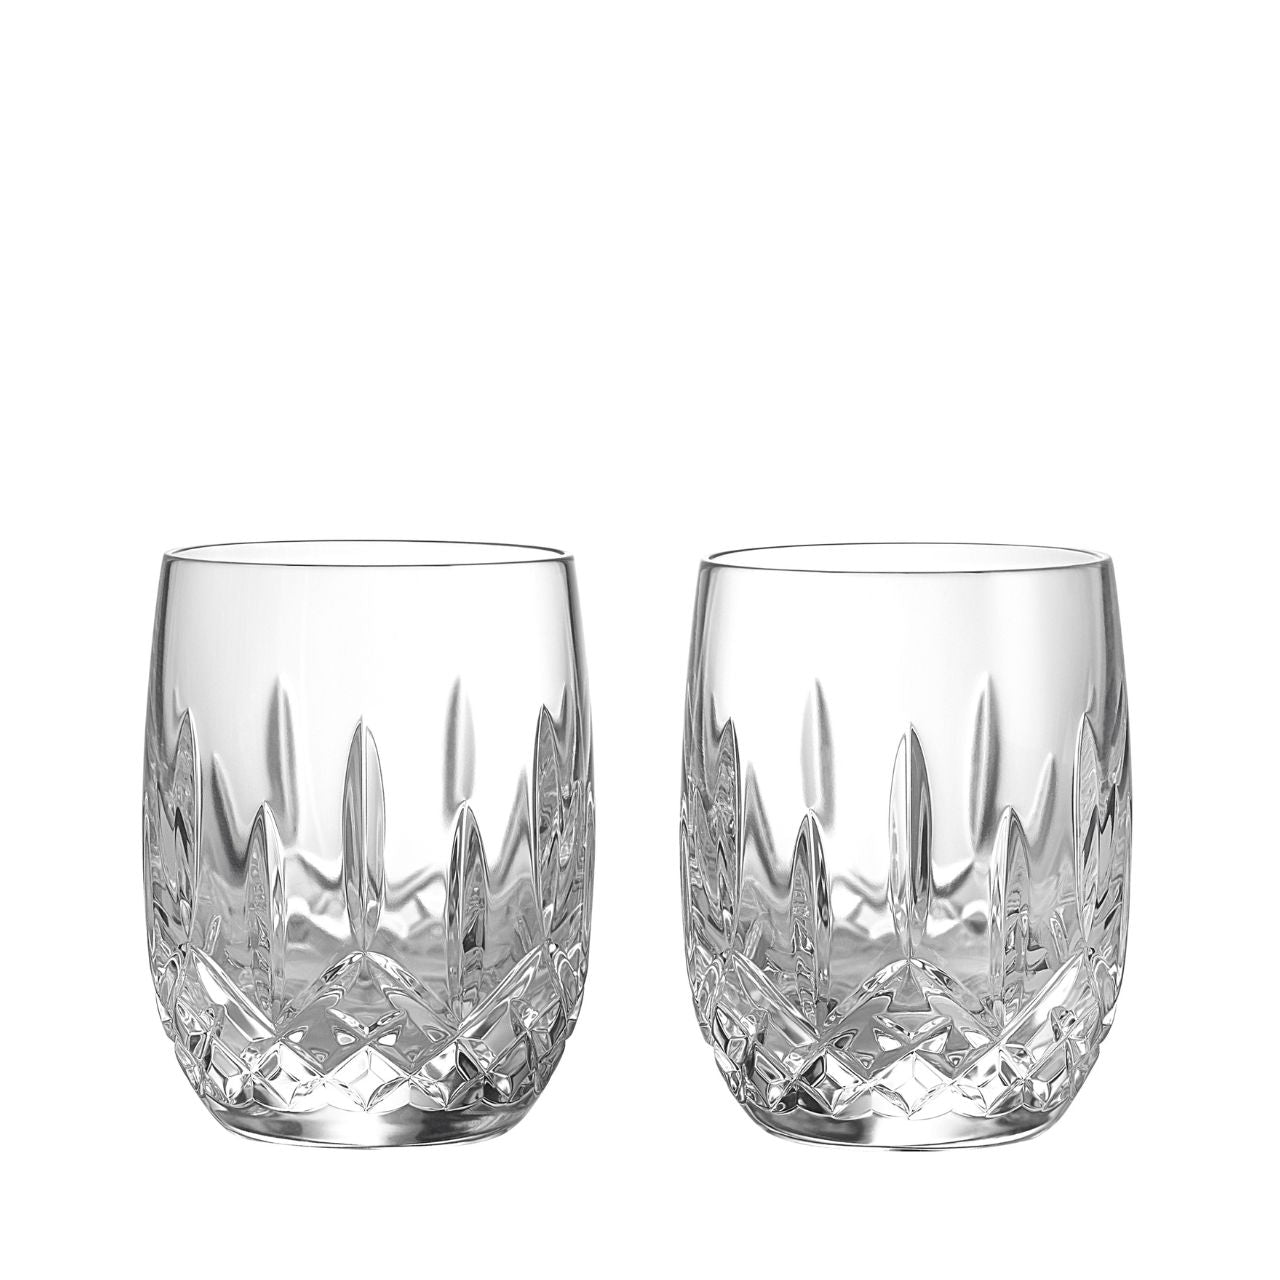 Waterford Crystal Lismore Connoisseur Rounded Tumbler  The Waterford Lismore Connoisseur Whiskey Series respects and reveres whiskeys of all varieties with a flight of hand crafted crystal tasting glasses, each one individually shaped and designed for a specific whiskey to be enjoyed straight, neat, or on the rocks. How you choose to drink your whiskey will determine the best Lismore Connoisseur glass for your particular pour.